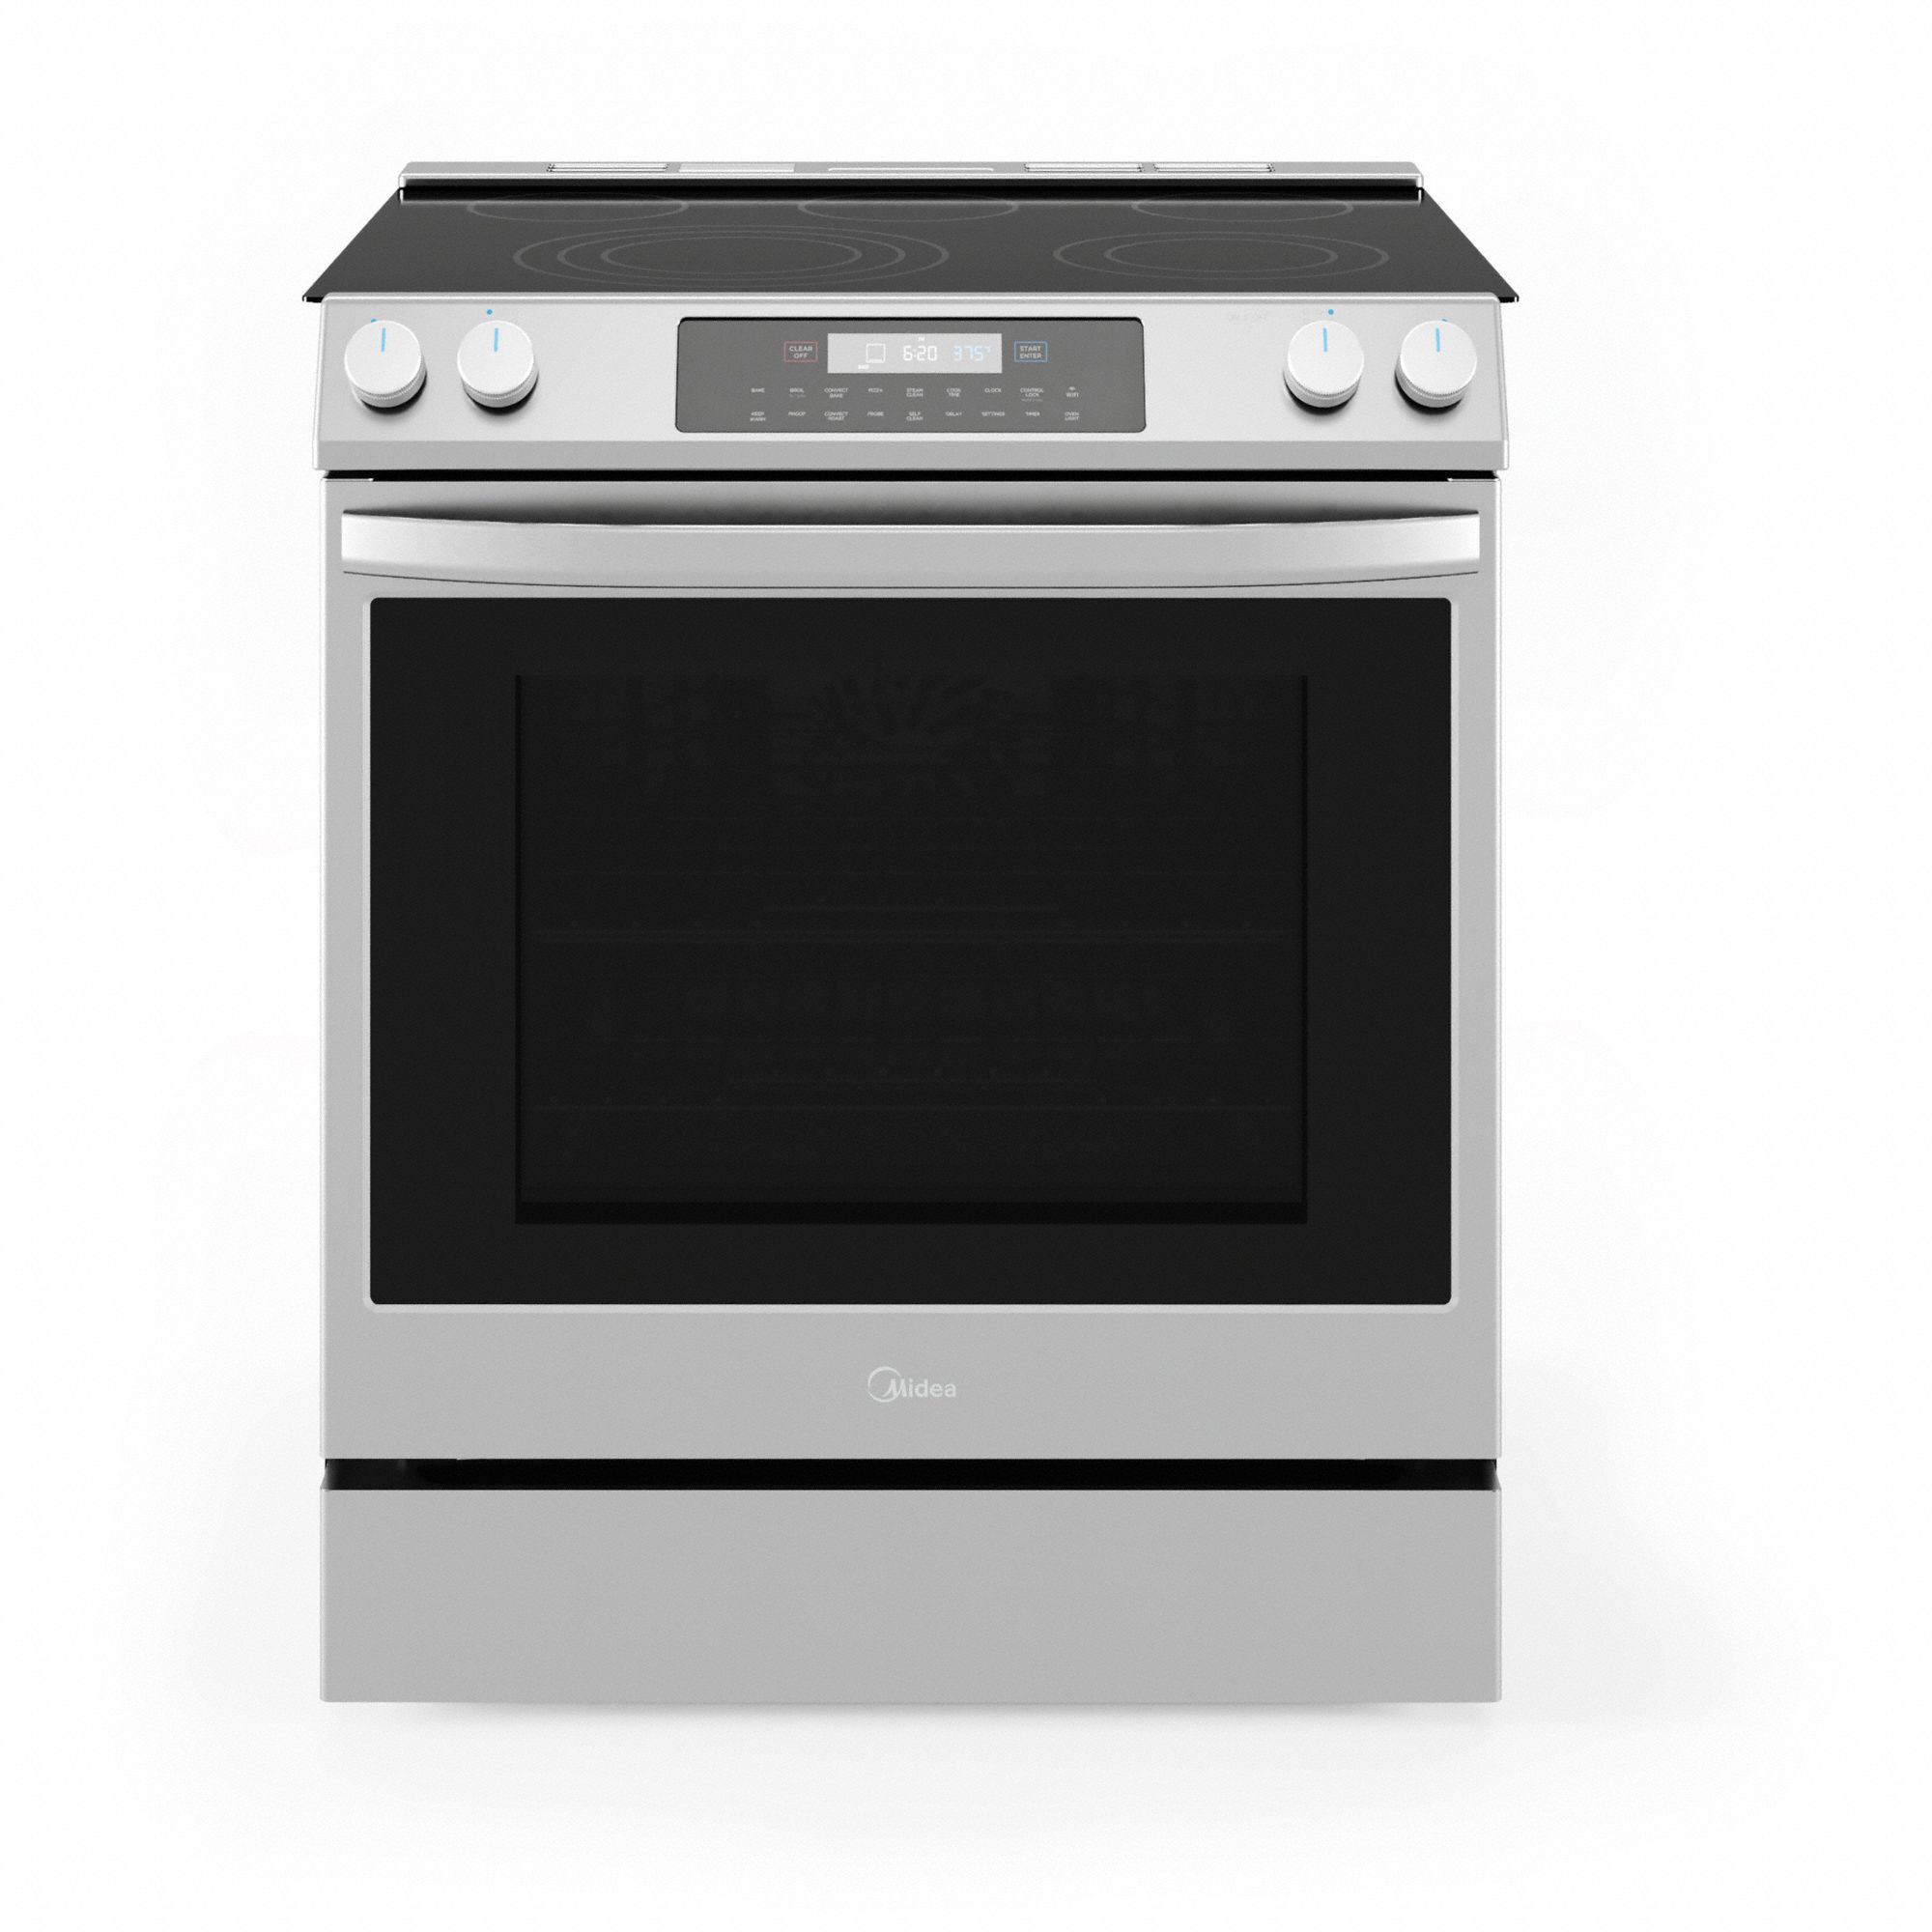 Range: Stainless Steel, Electric, 5 Burners, ADA Compliant, Self Cleaning